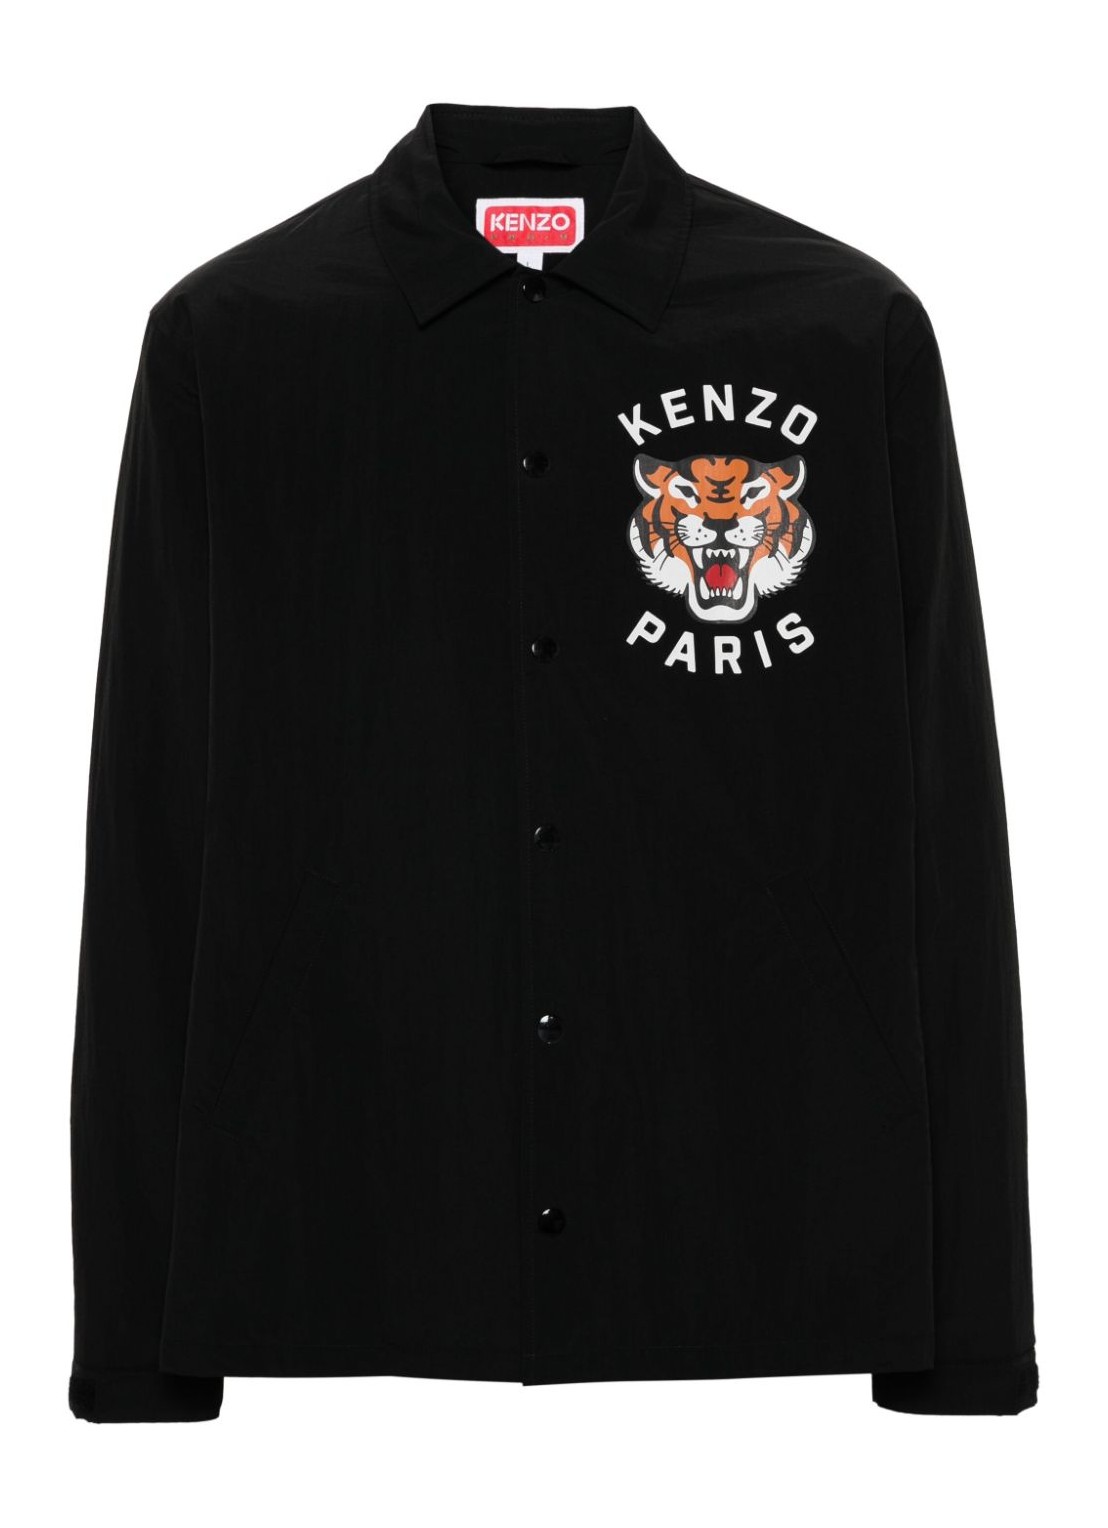 Outerwear kenzo outerwear man lucky tiger padded coach fe55bl0629ng 99 talla M
 